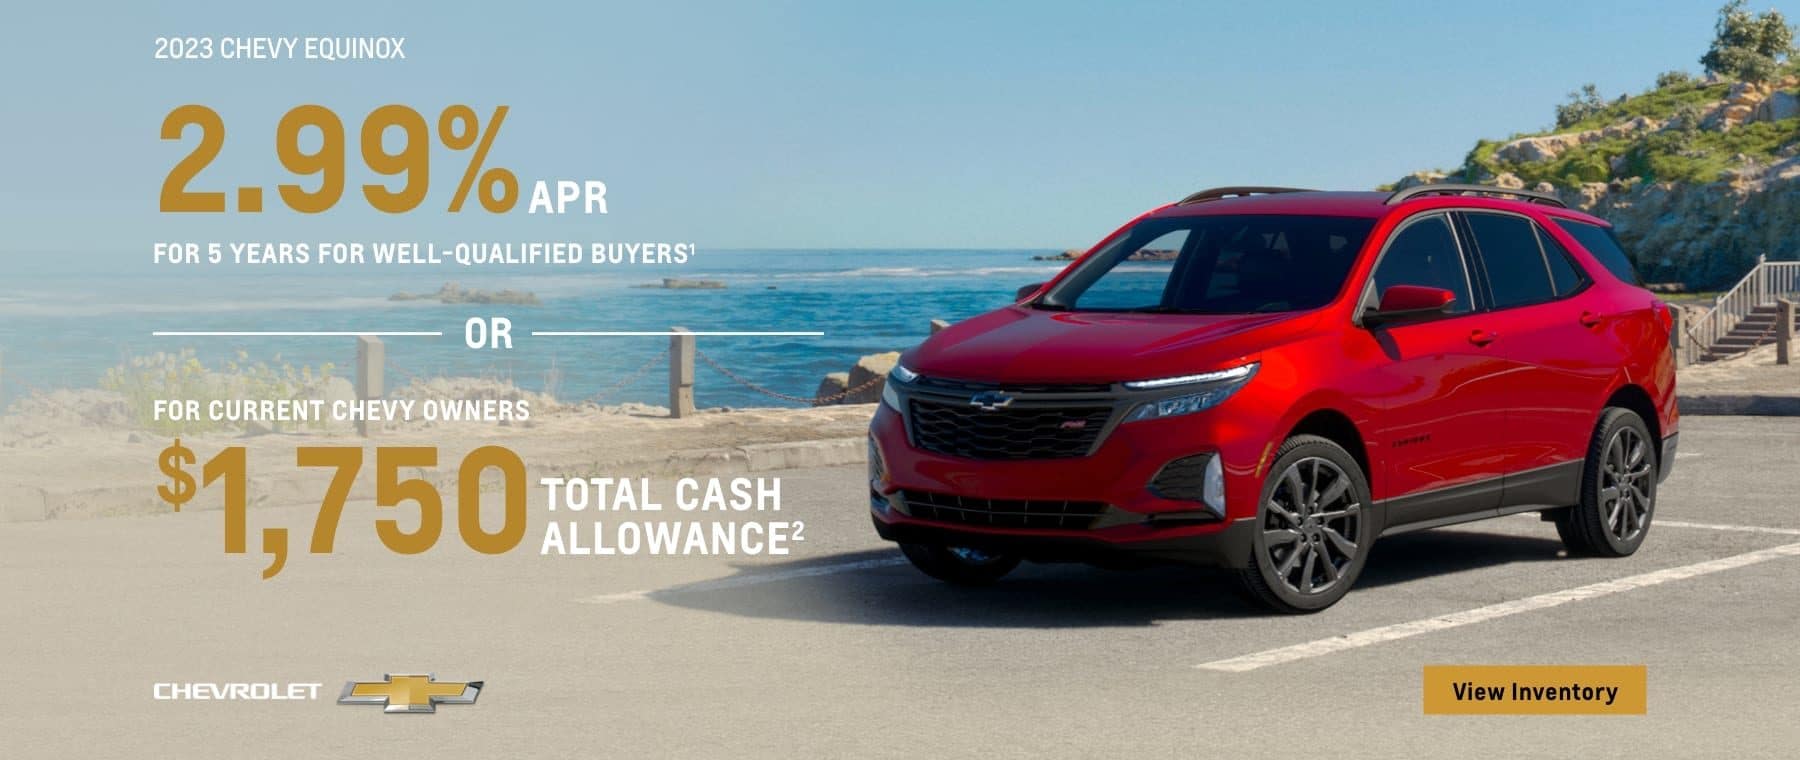 2023 Chevy Equinox. 2.99% APR for 5 years for well-qualified buyers. Or, for current Chevy owners $1,750 total cash allowance.